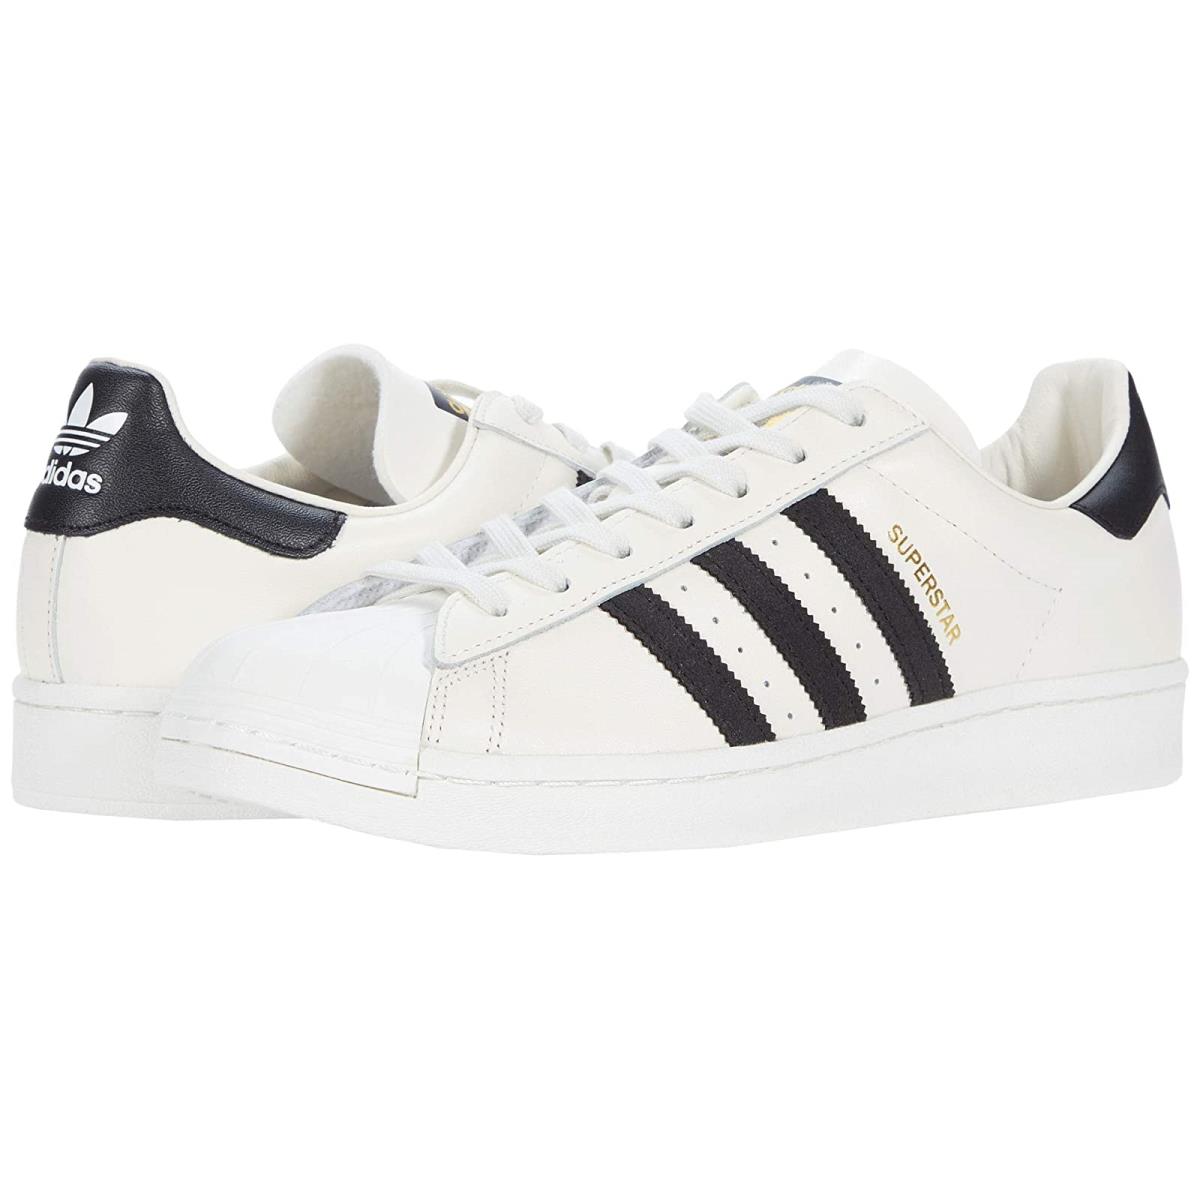 Man`s Sneakers Athletic Shoes Adidas Originals Superstar Chalk White/Core Black/Off-White